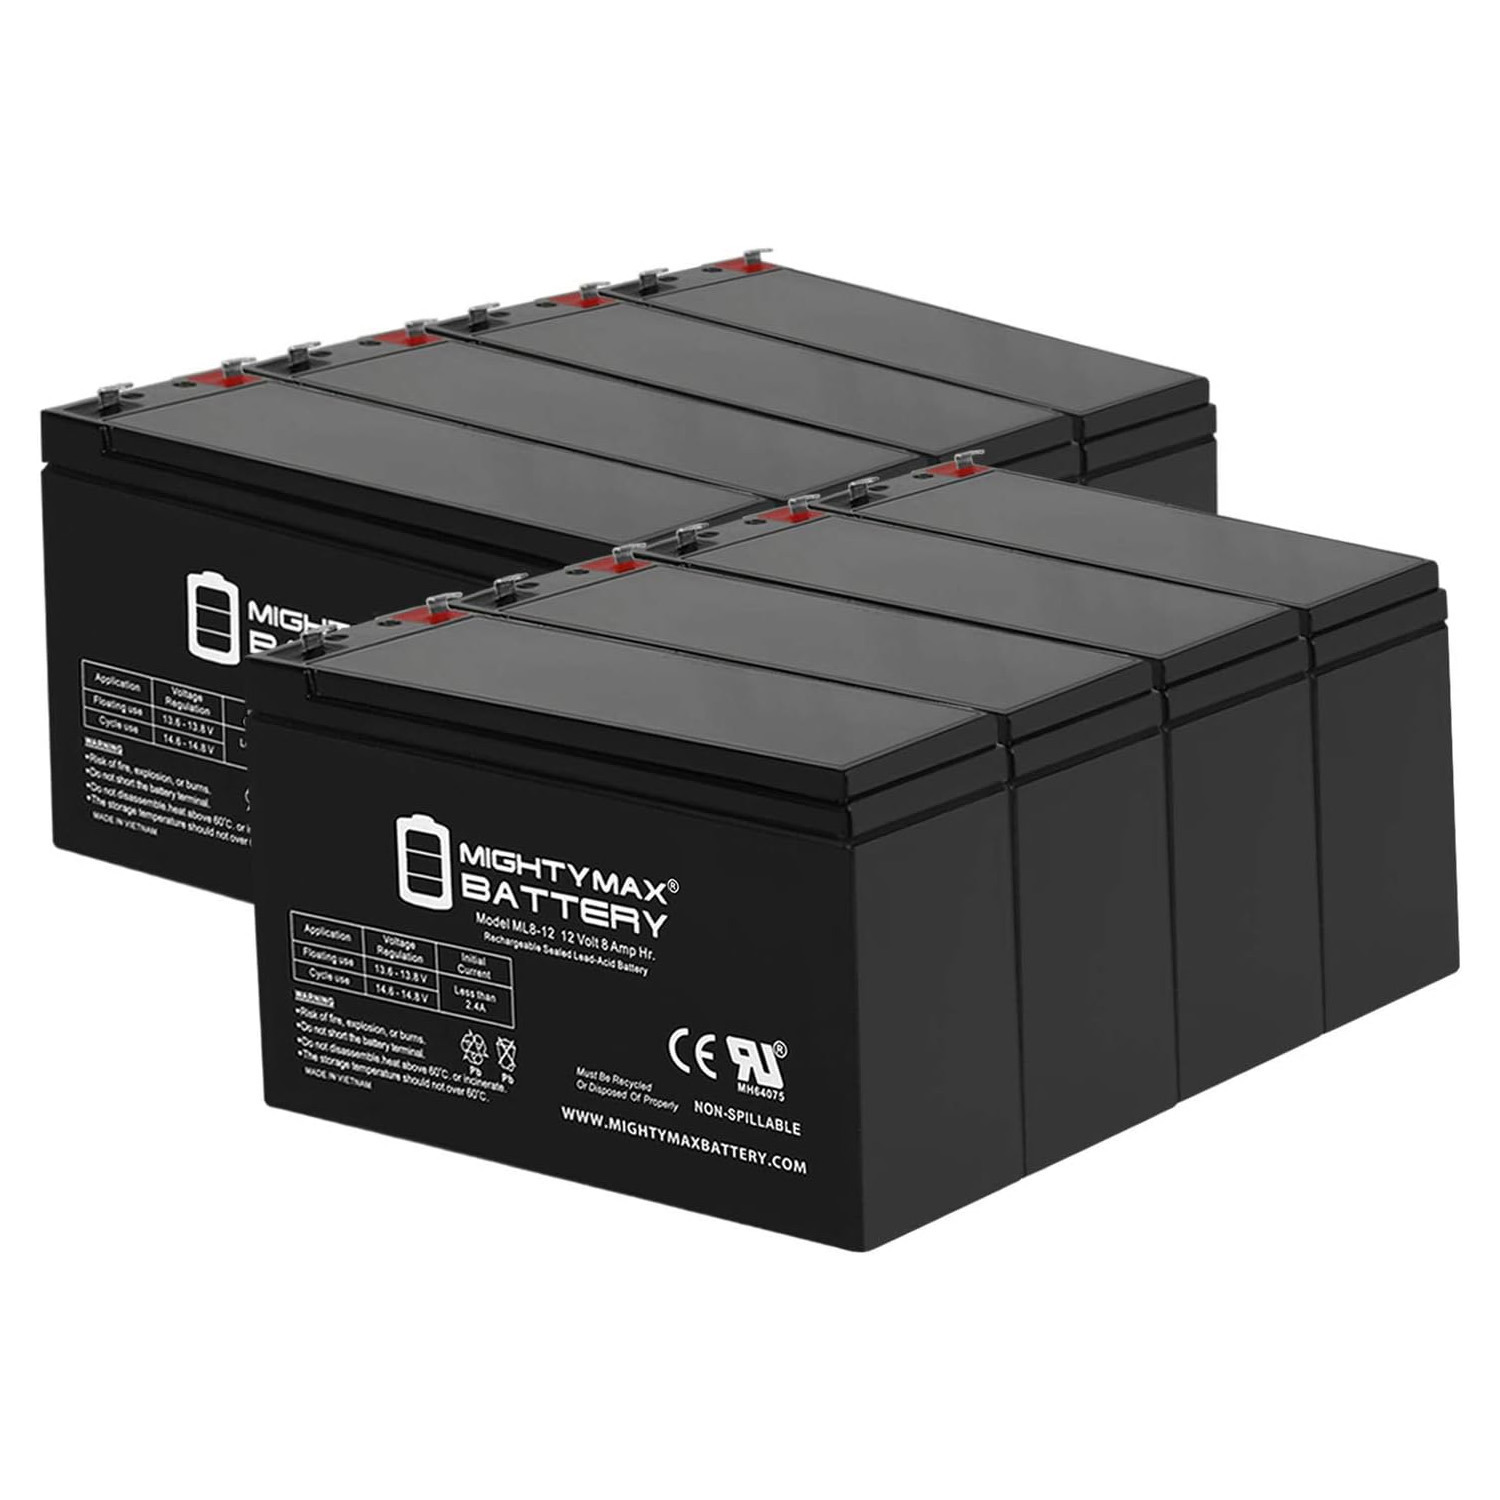 12V 8Ah Battery Replacement for Sola B510-600-U, B510-900-A - 8 Pack